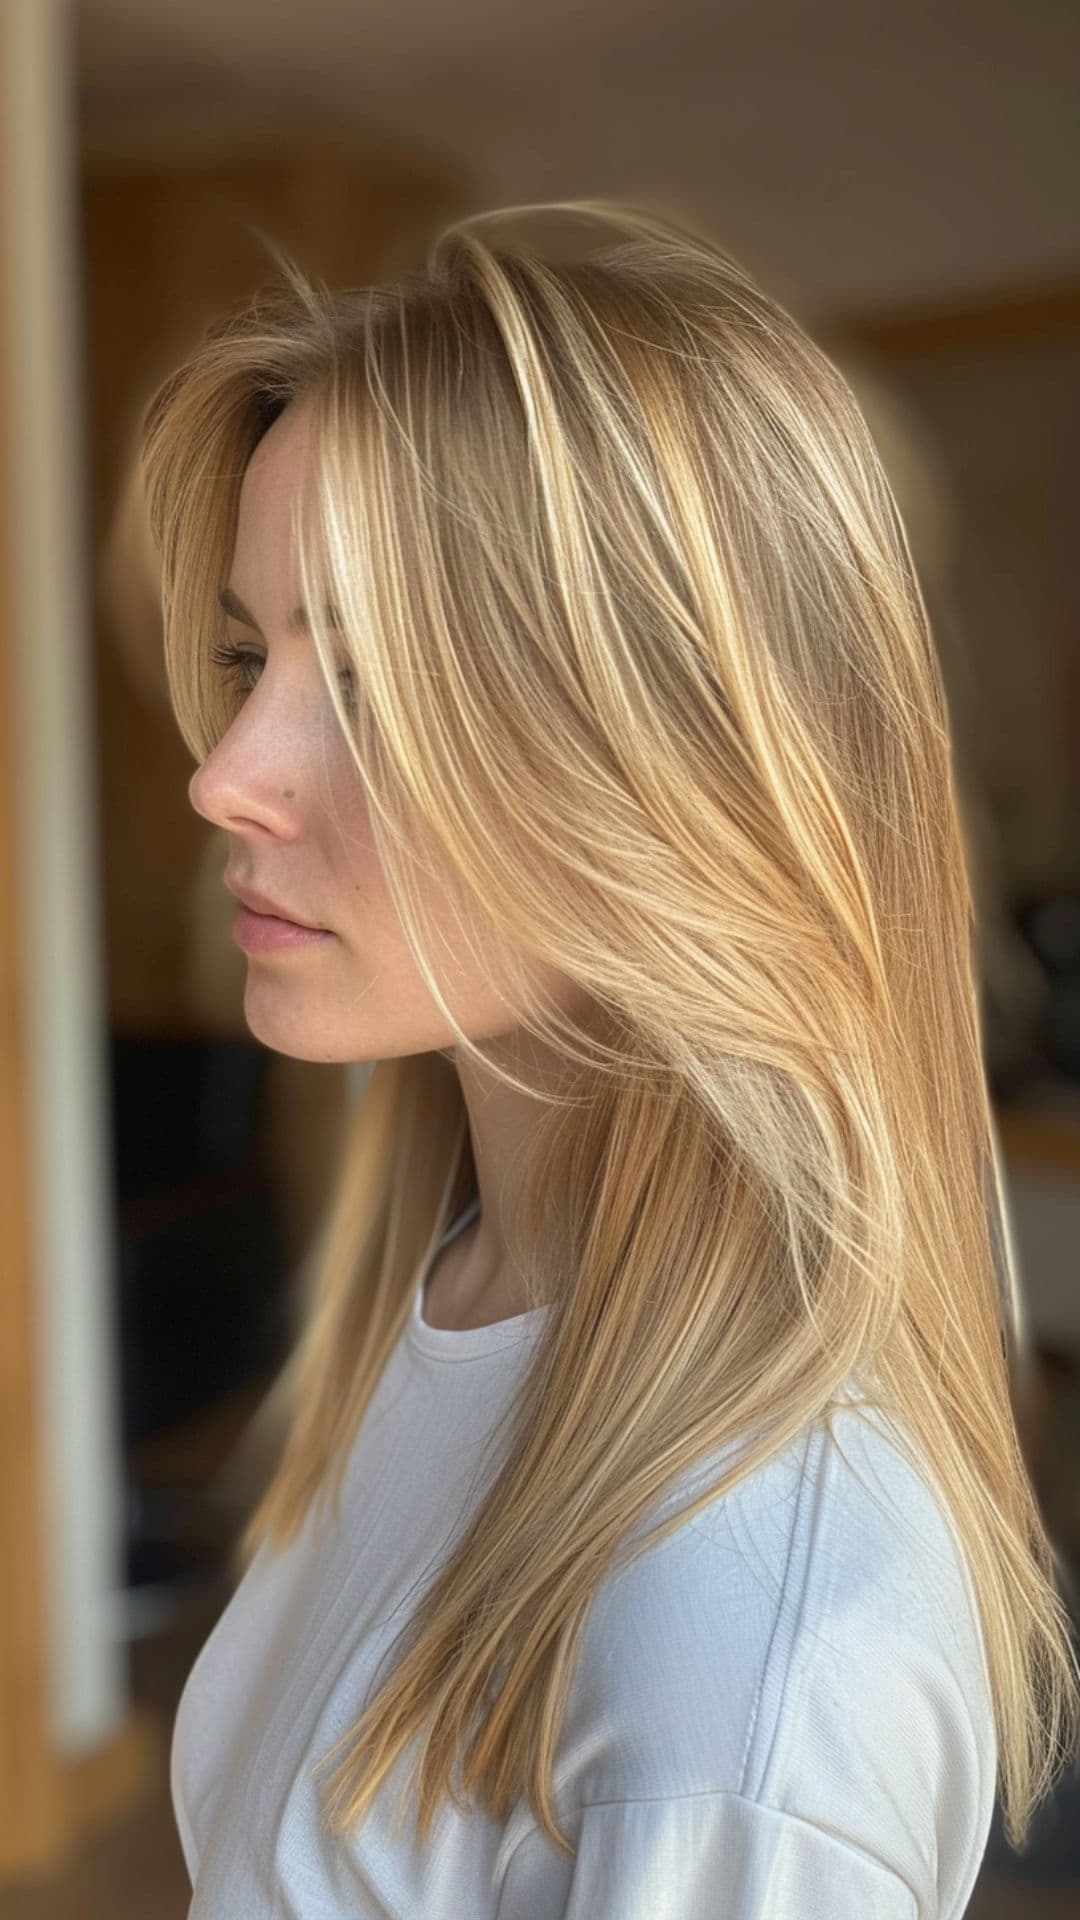 A woman modelling a subtle buttery blonde highlights hair.